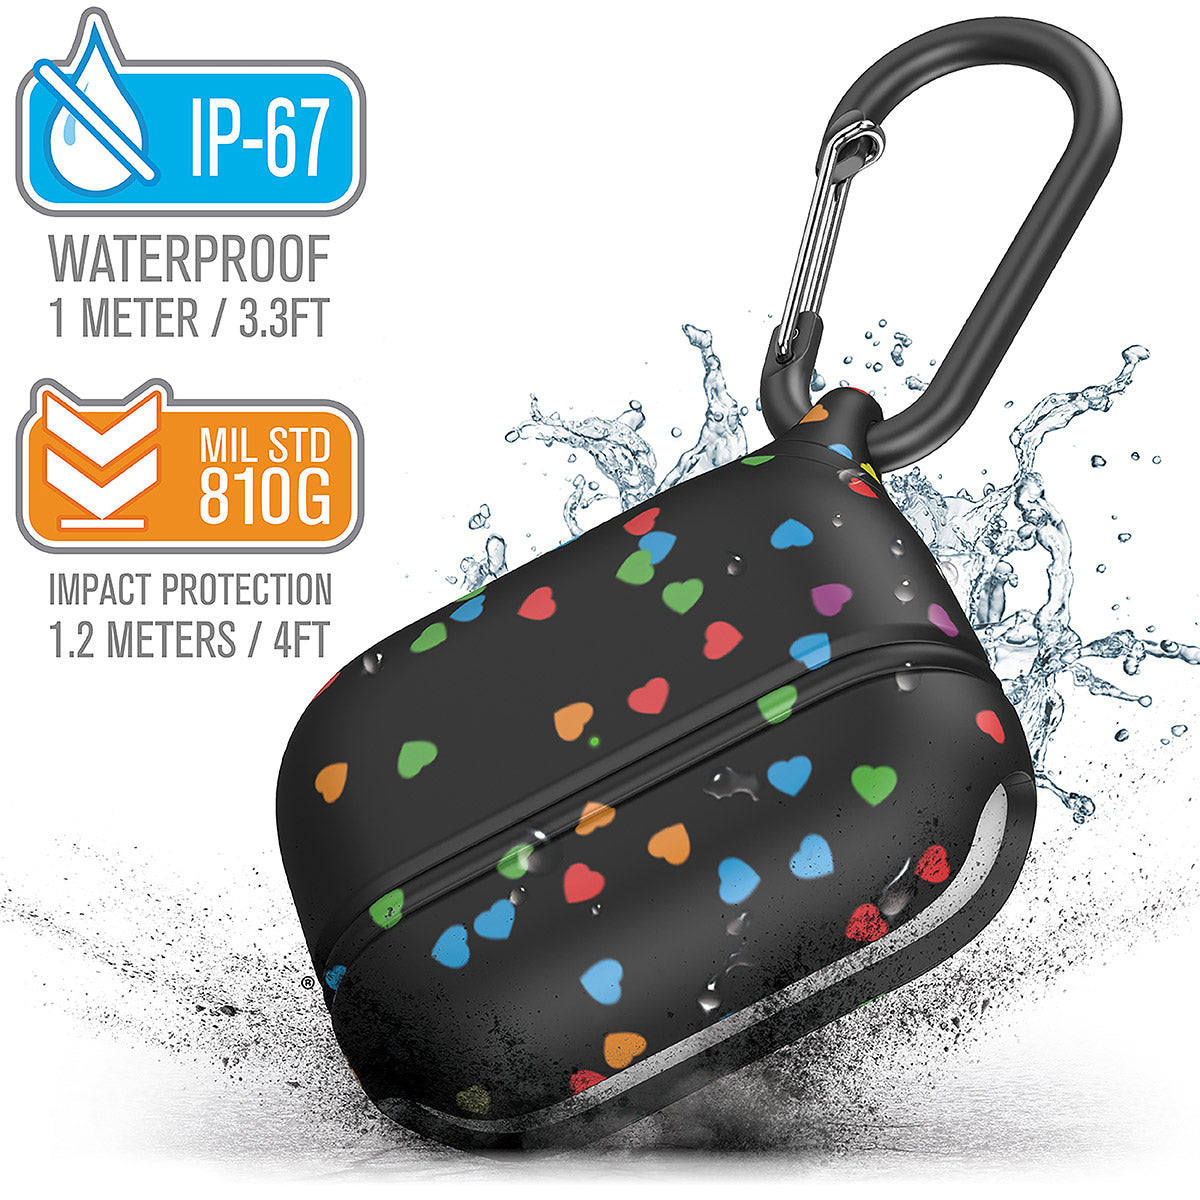 catalyst airpods pro gen 2 1 waterproof case carabiner special edition black with hearts with cracked floor and splashes of water text reads ip-67 waterproof 1 meter 3.3ft mil std 810g impact protection 1.2 meters 4ft